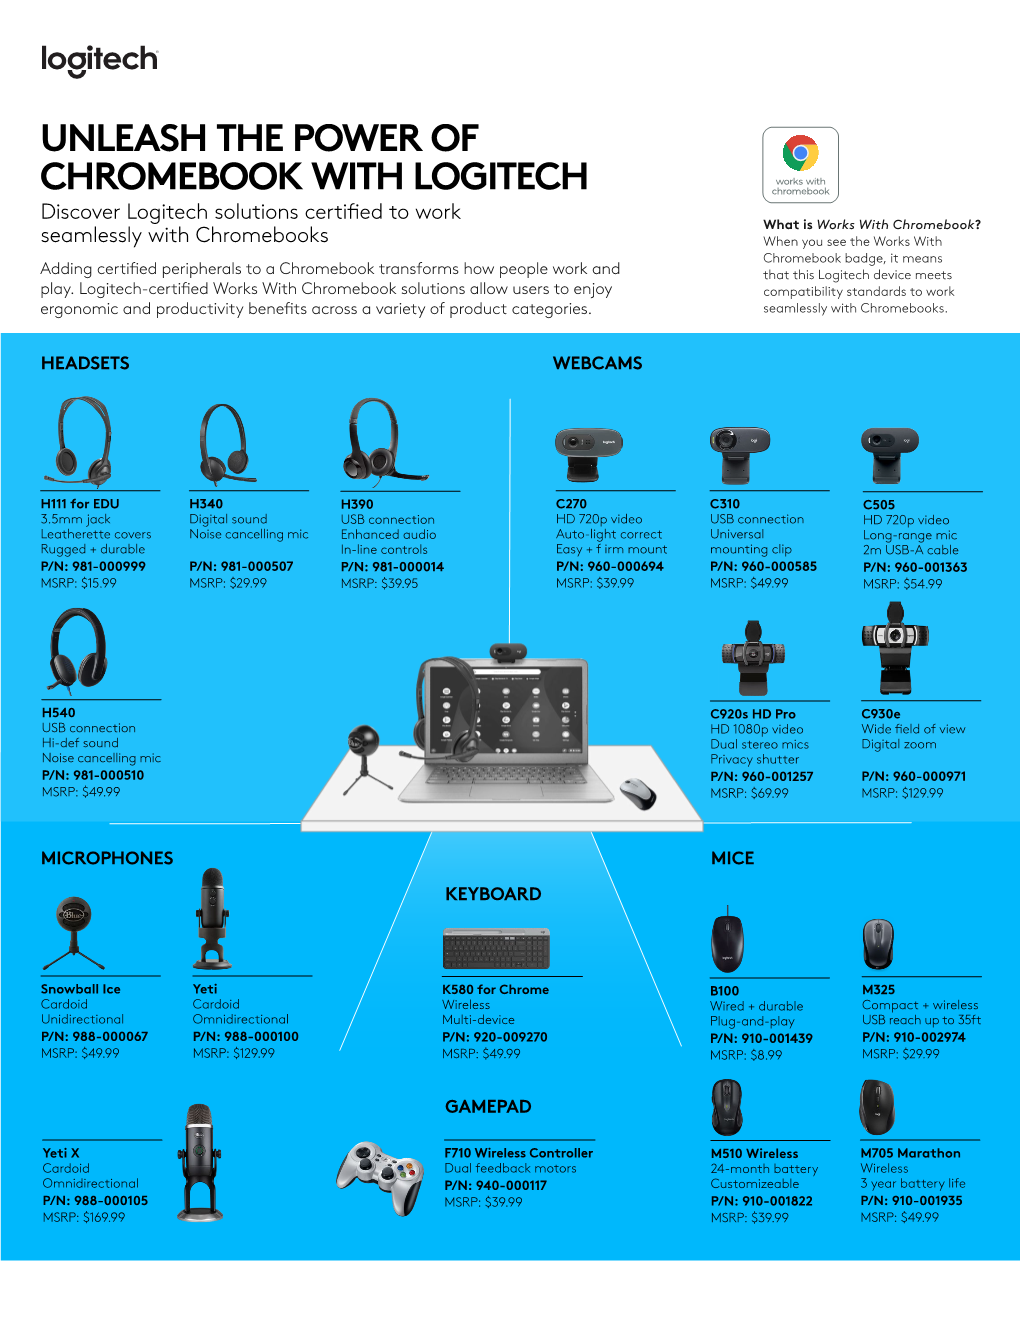 Unleash the Power of Chromebook with Logitech